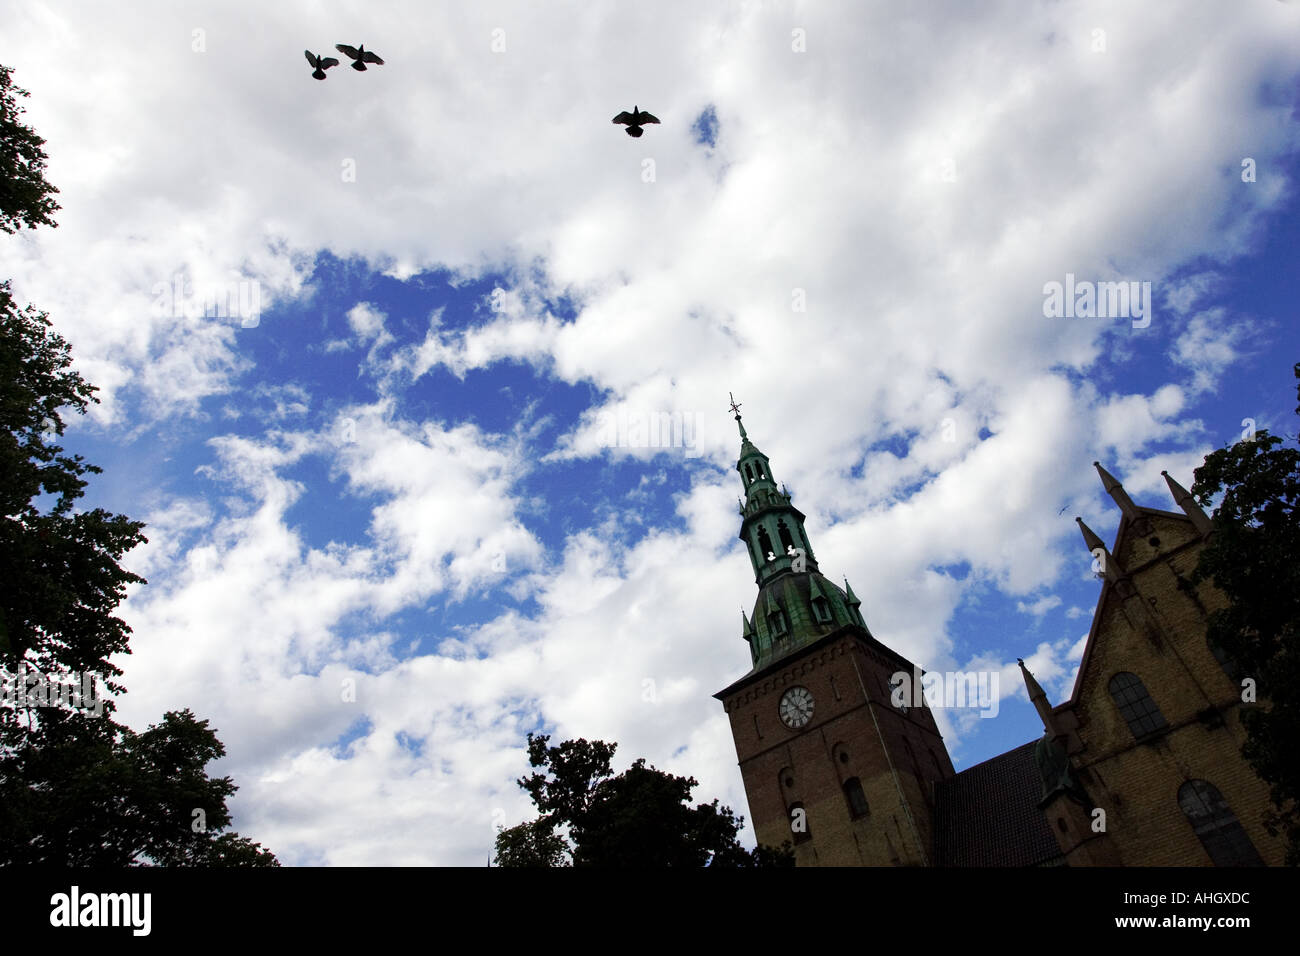 Outlined bell tower of Oslo's cathedral and flying pigeons against a dramatic sky. Stock Photo